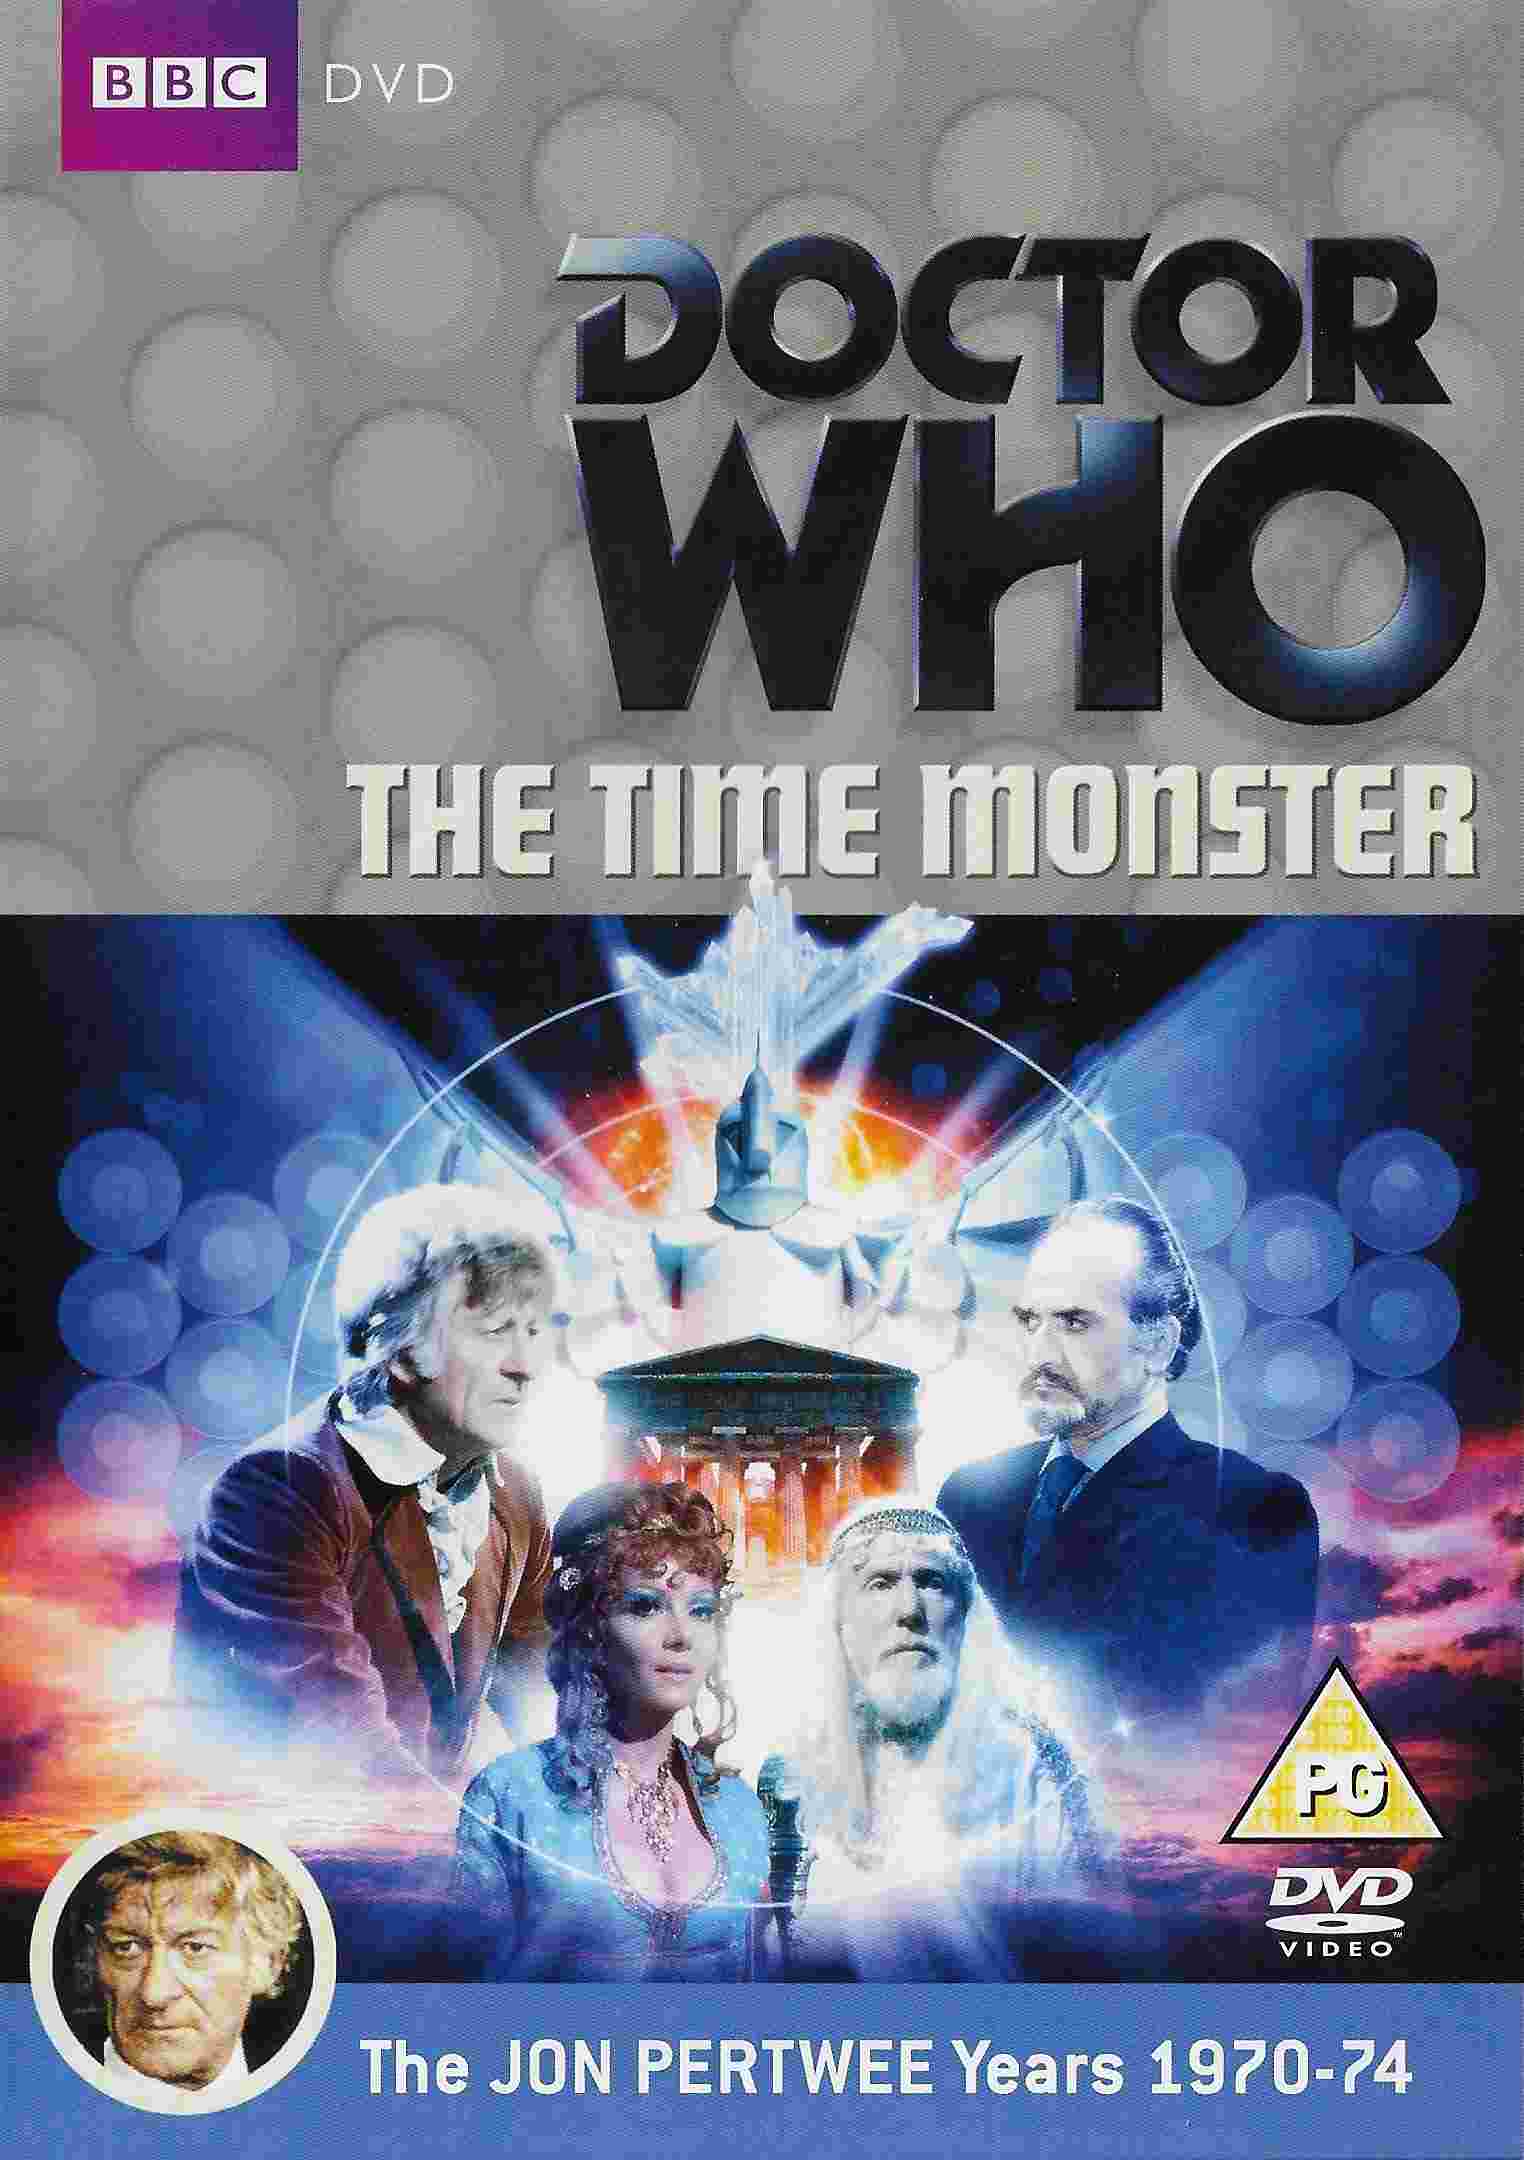 Picture of BBCDVD 2851A Doctor Who - The time monster by artist Robert Sloman from the BBC dvds - Records and Tapes library